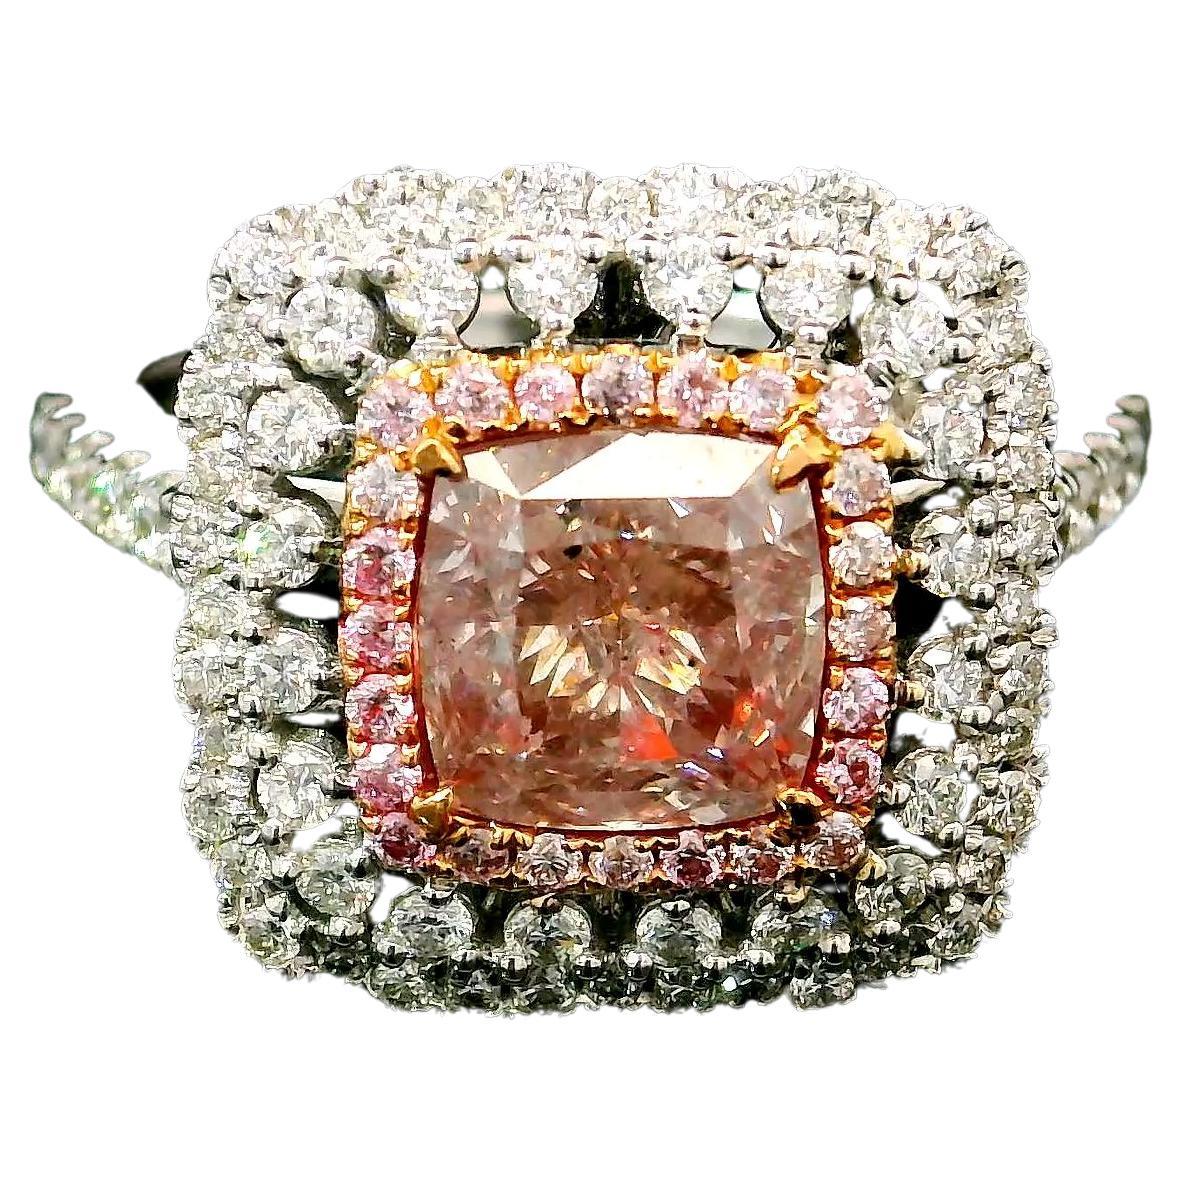 1.51 Carat Fancy Light Brownish Pink Diamond Ring I1 Clarity GIA Certified For Sale